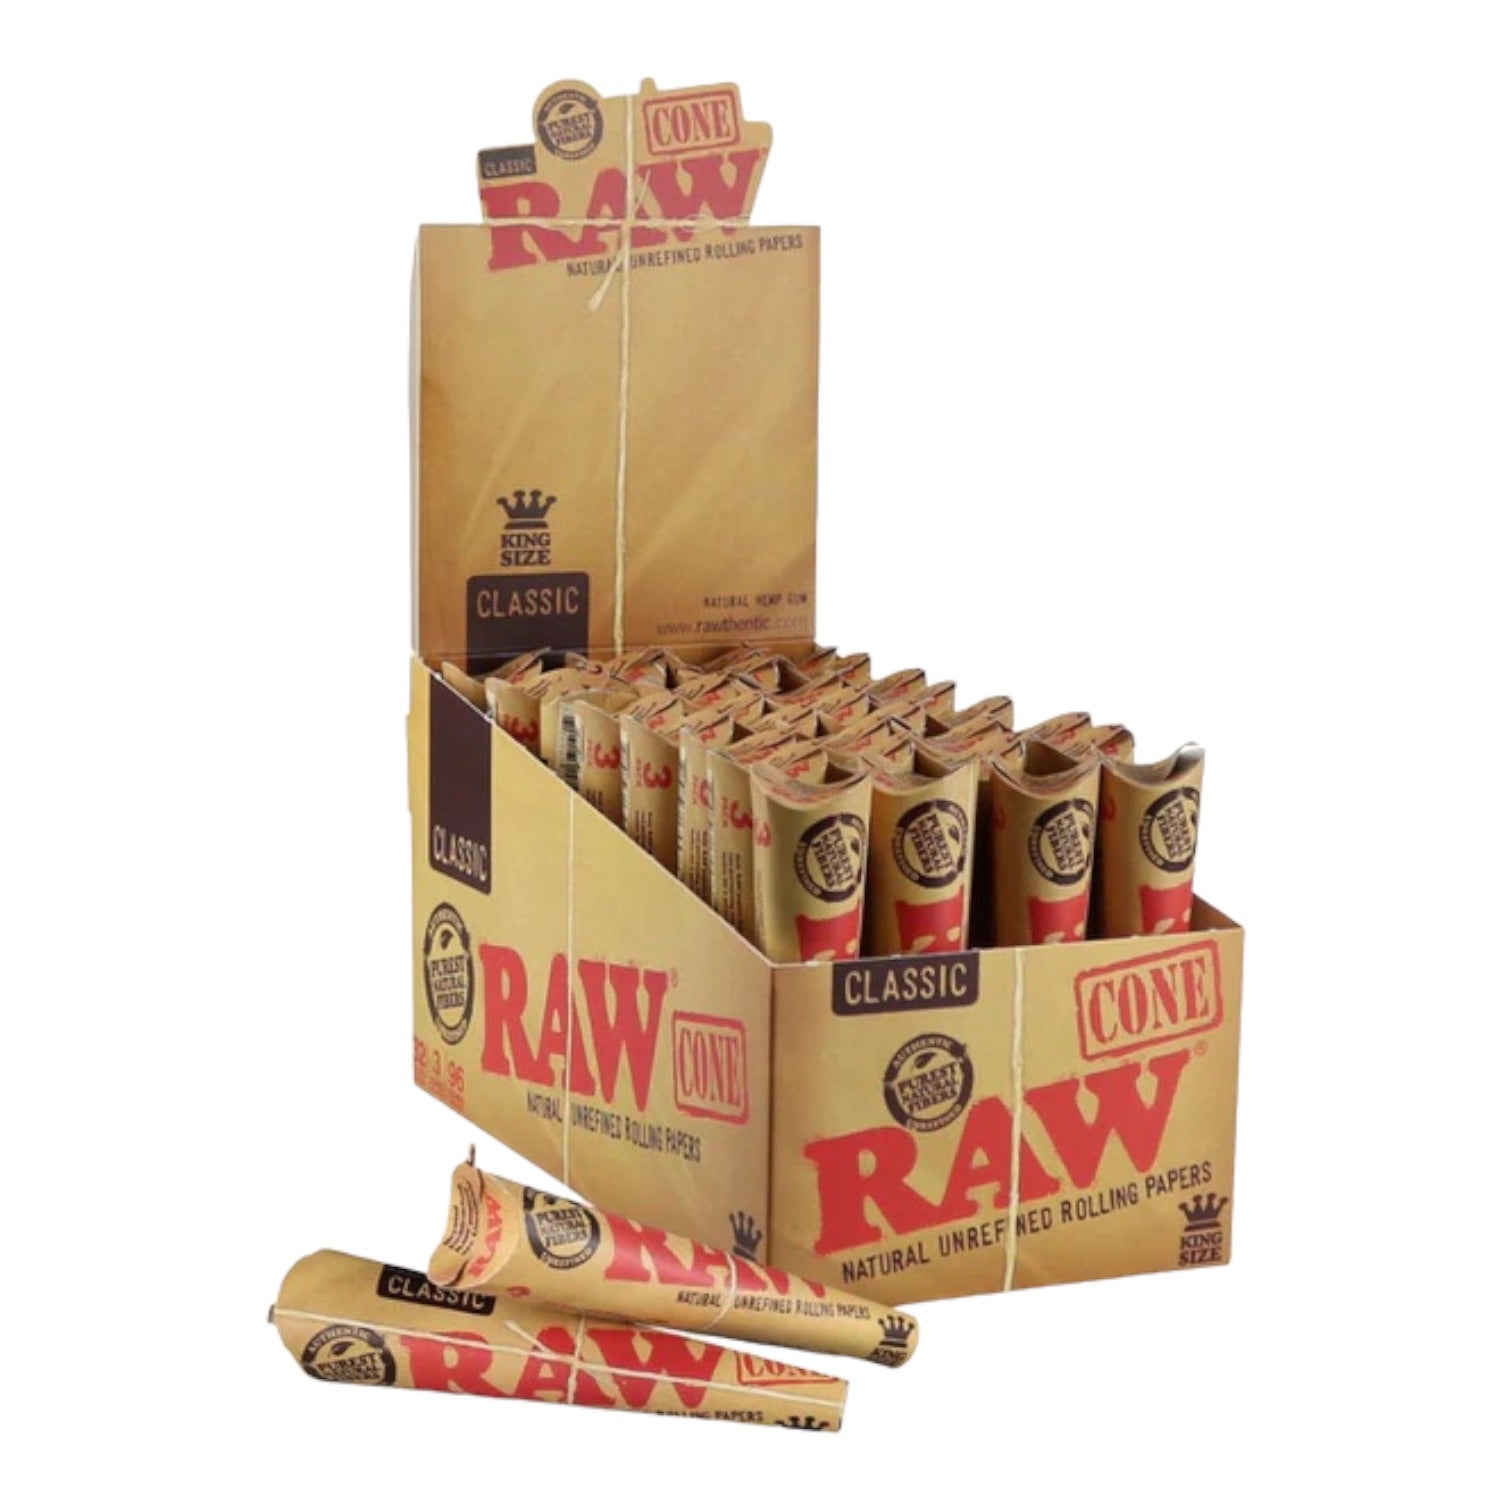 RAW - BOX Of Classic King Size Cones - 32 Pack Box